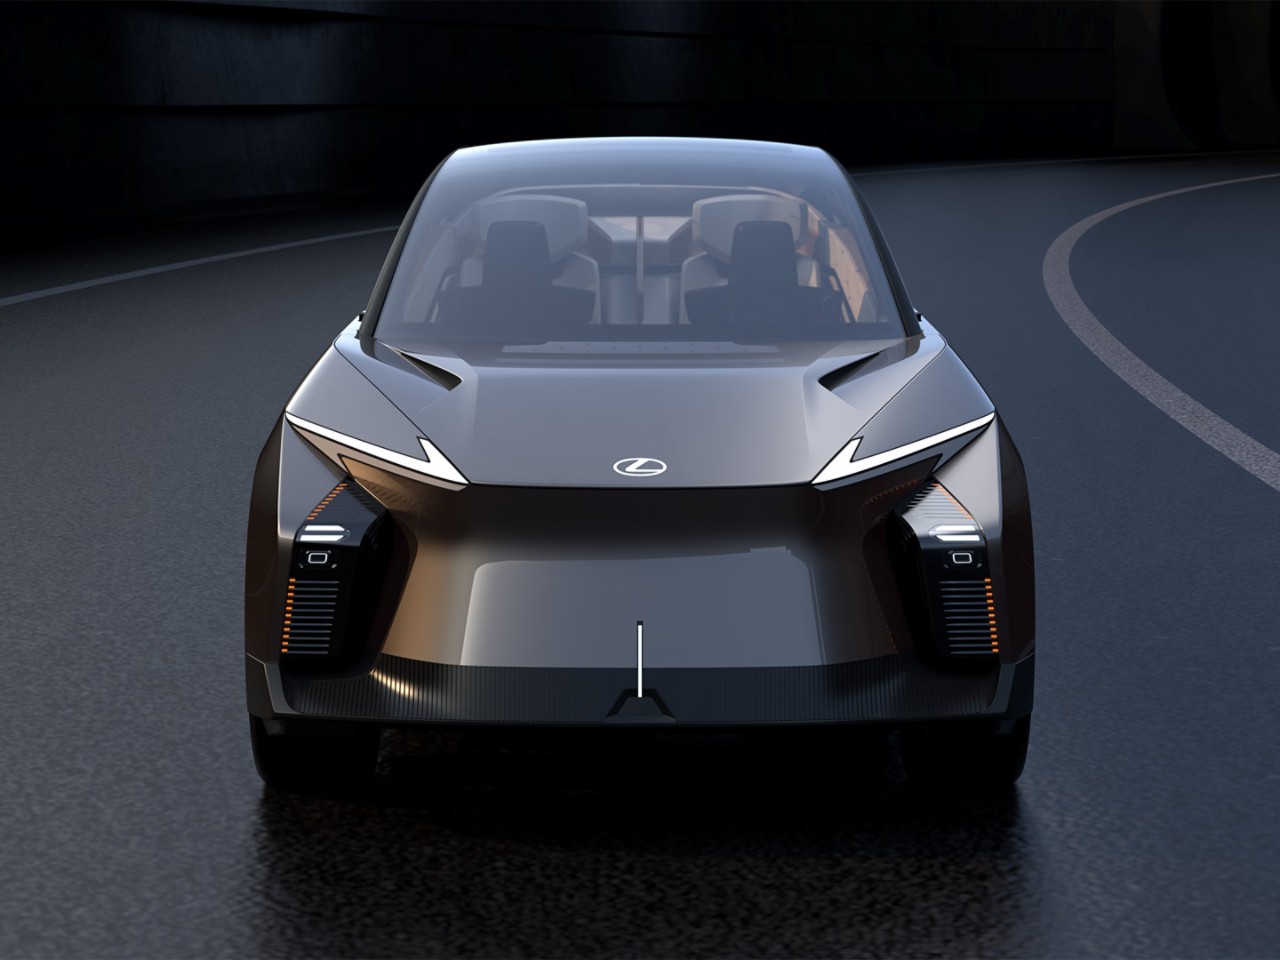 An LF-ZL Concept car driving on a road